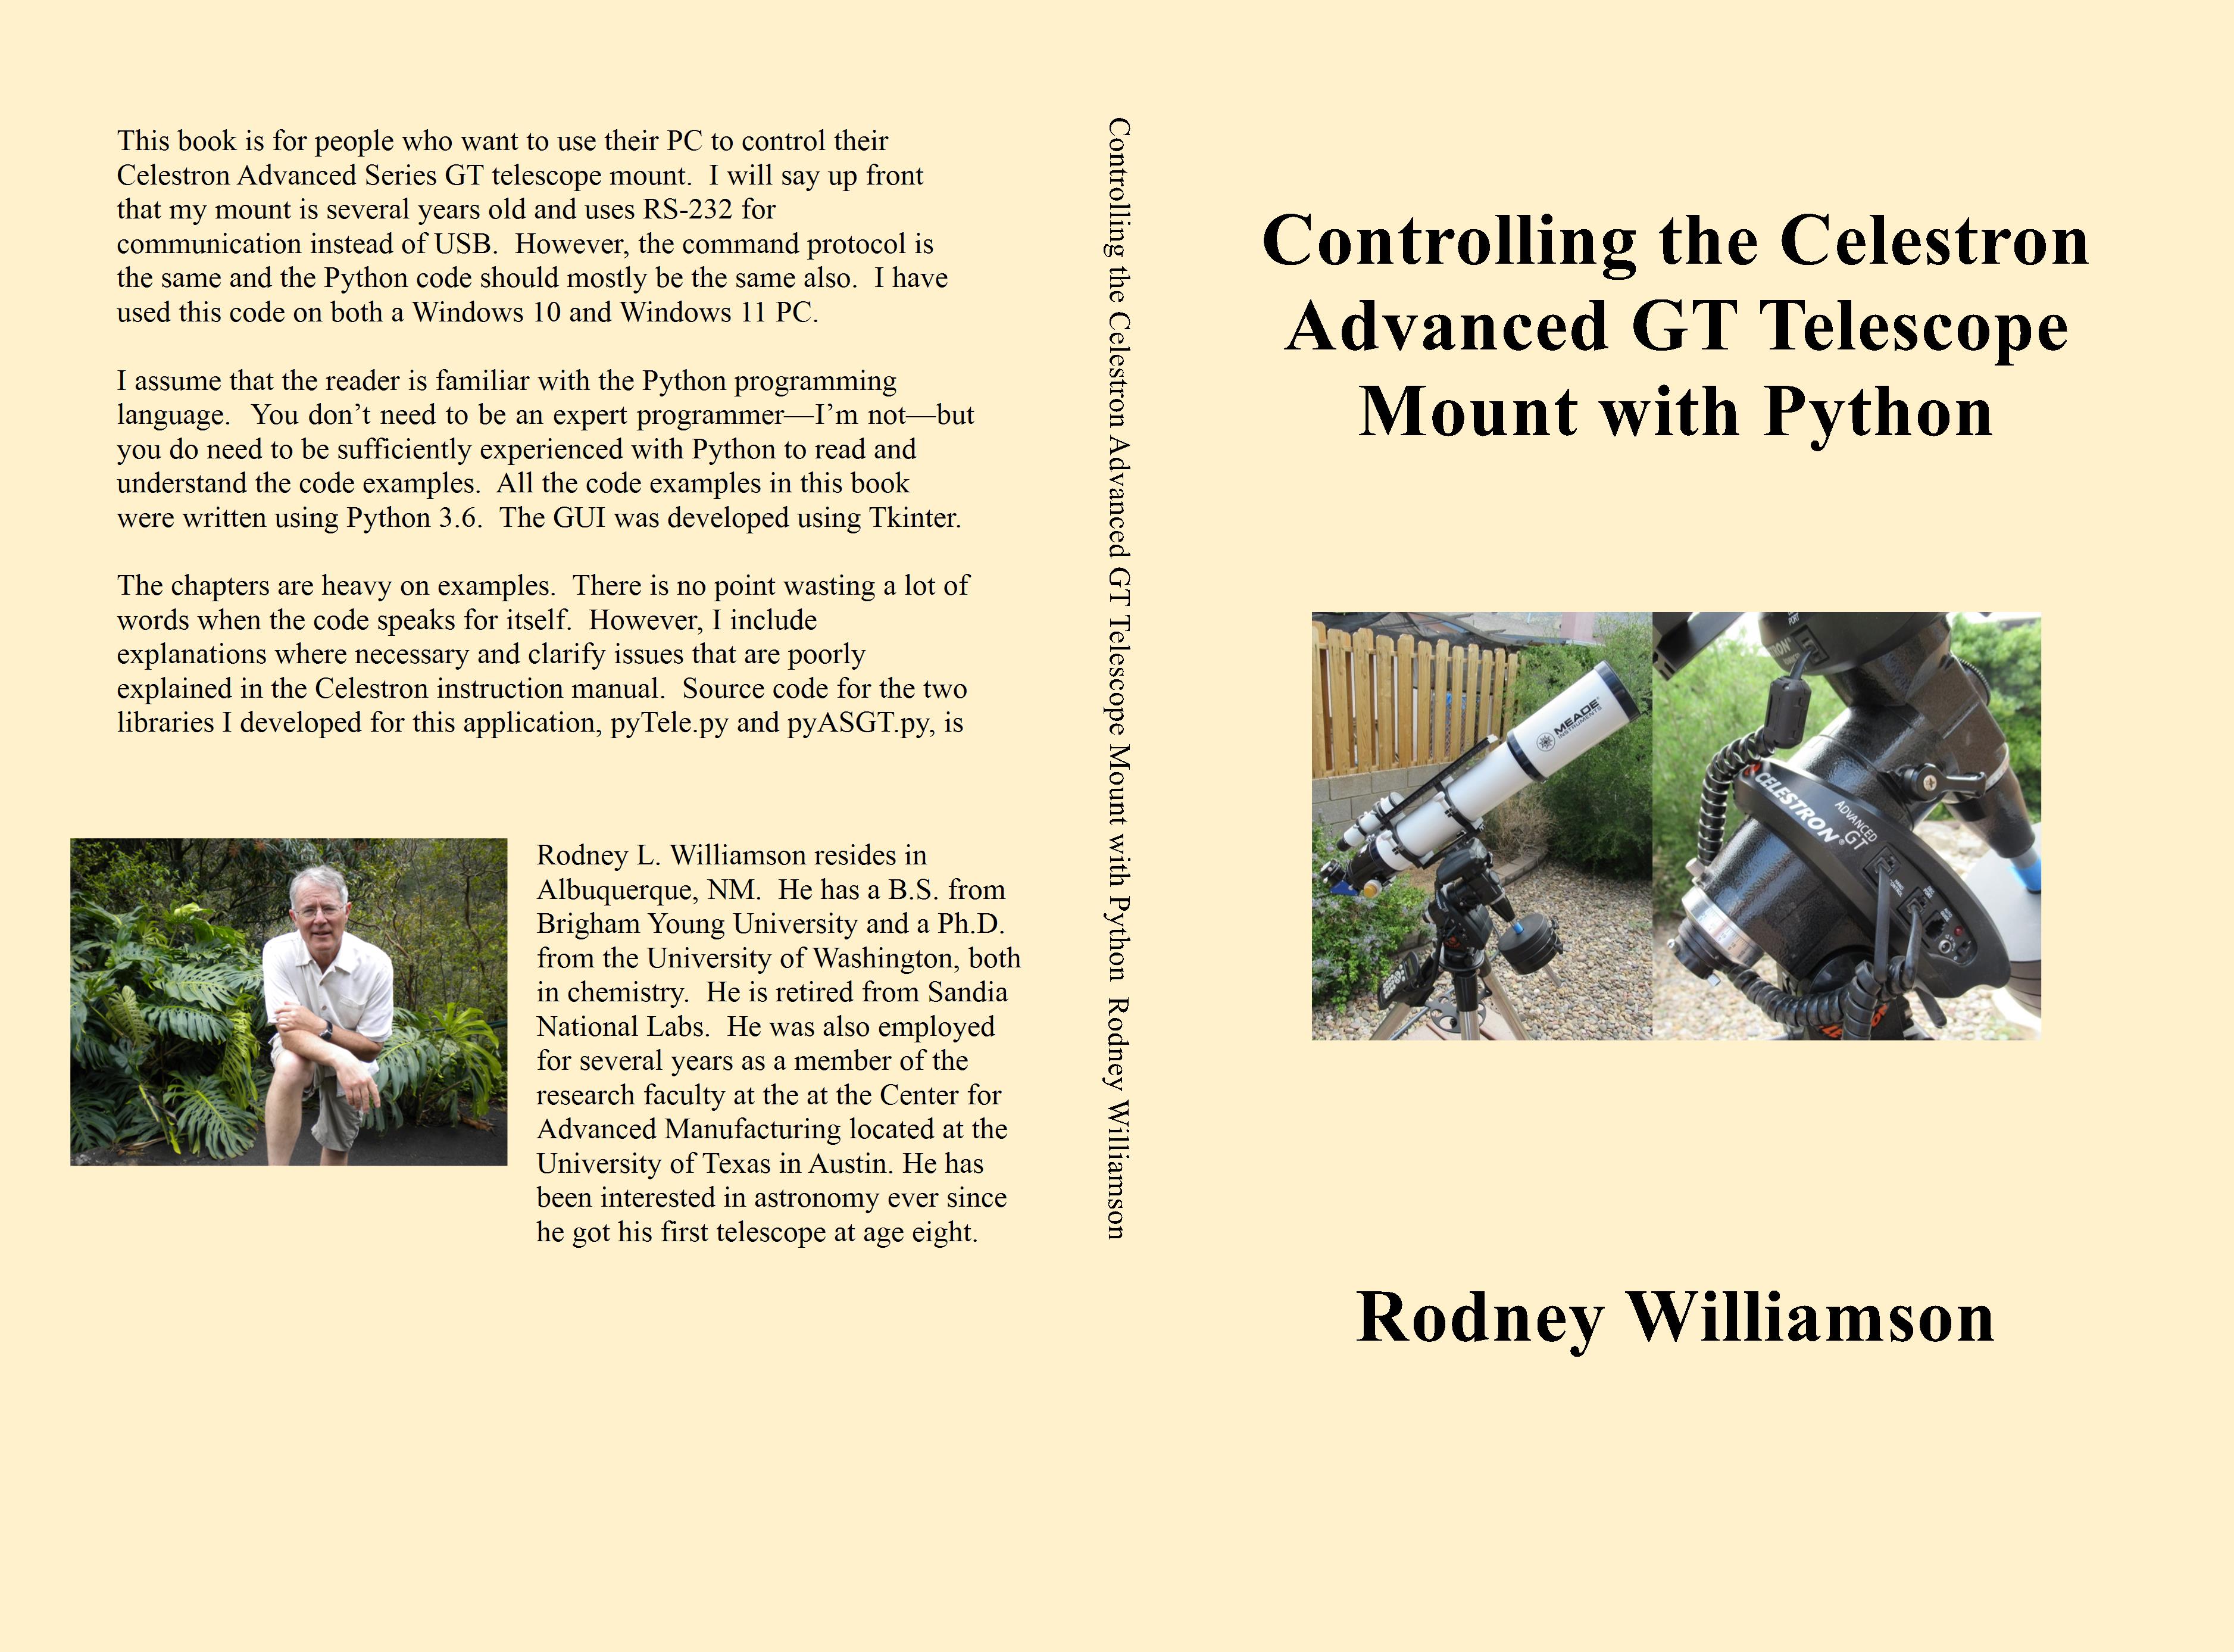 Controlling the Celestron Advanced GT Telescope Mount with Python cover image